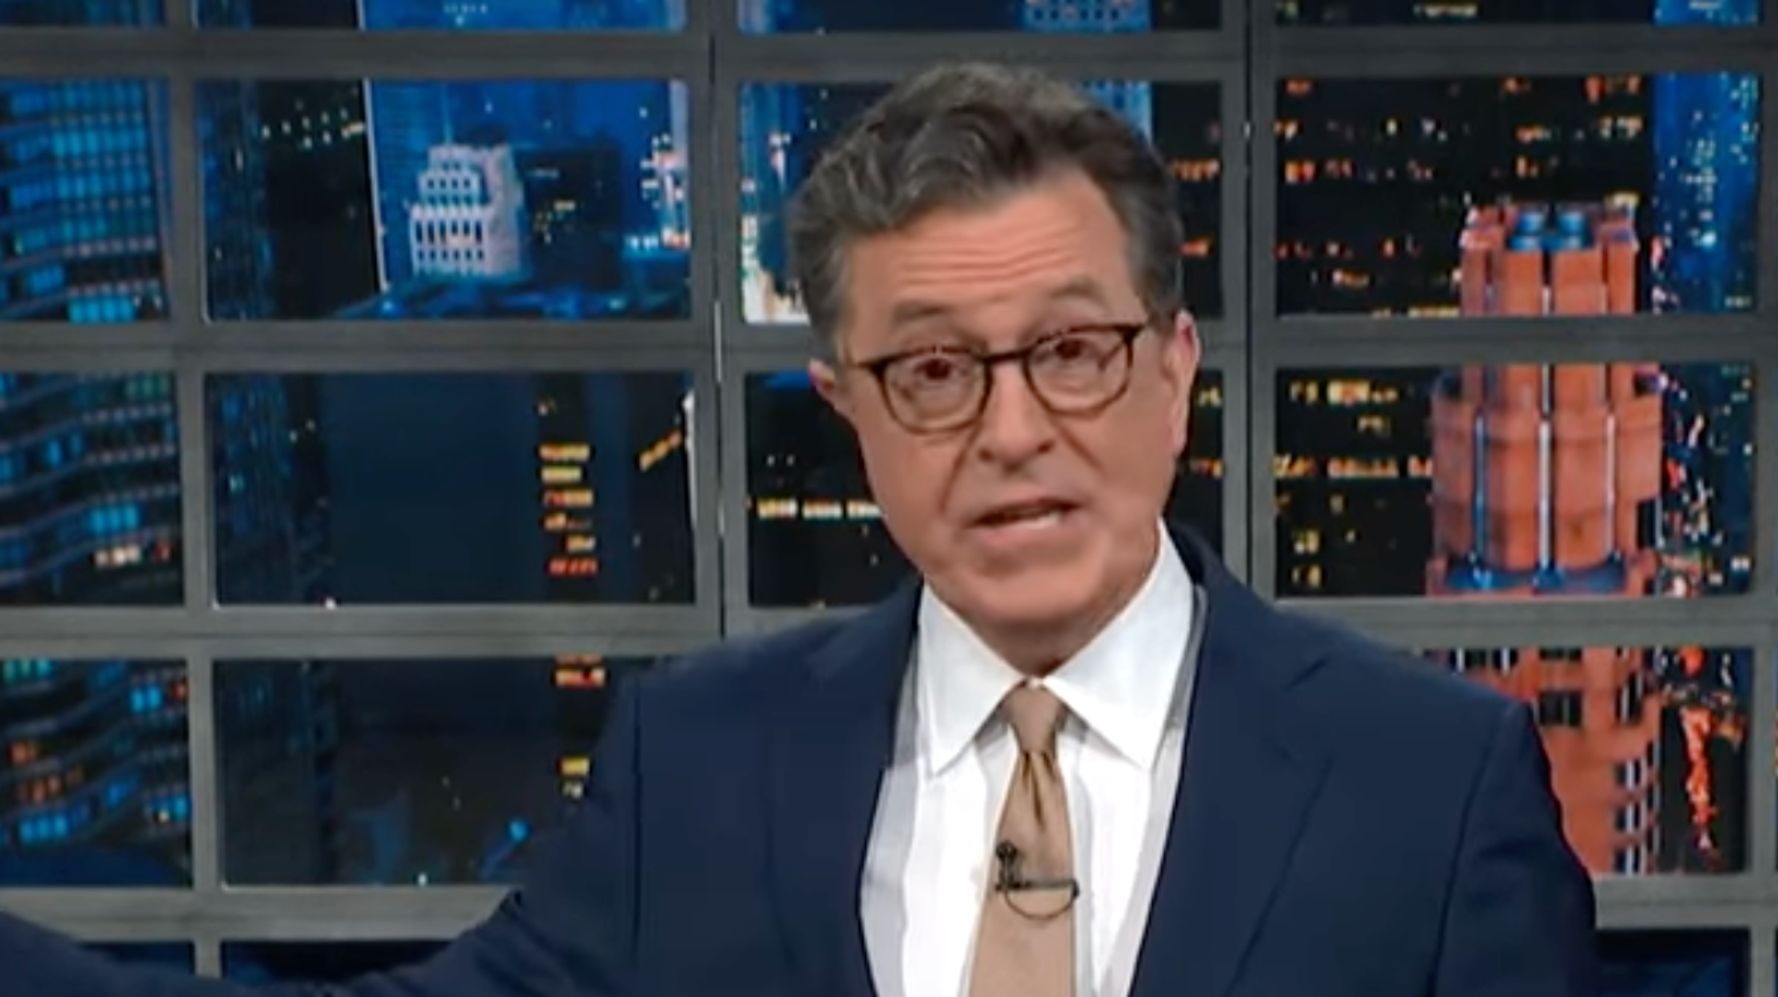 Stephen Colbert Sees The Great Lengths People Will Go For High-Price Burgers And Beer